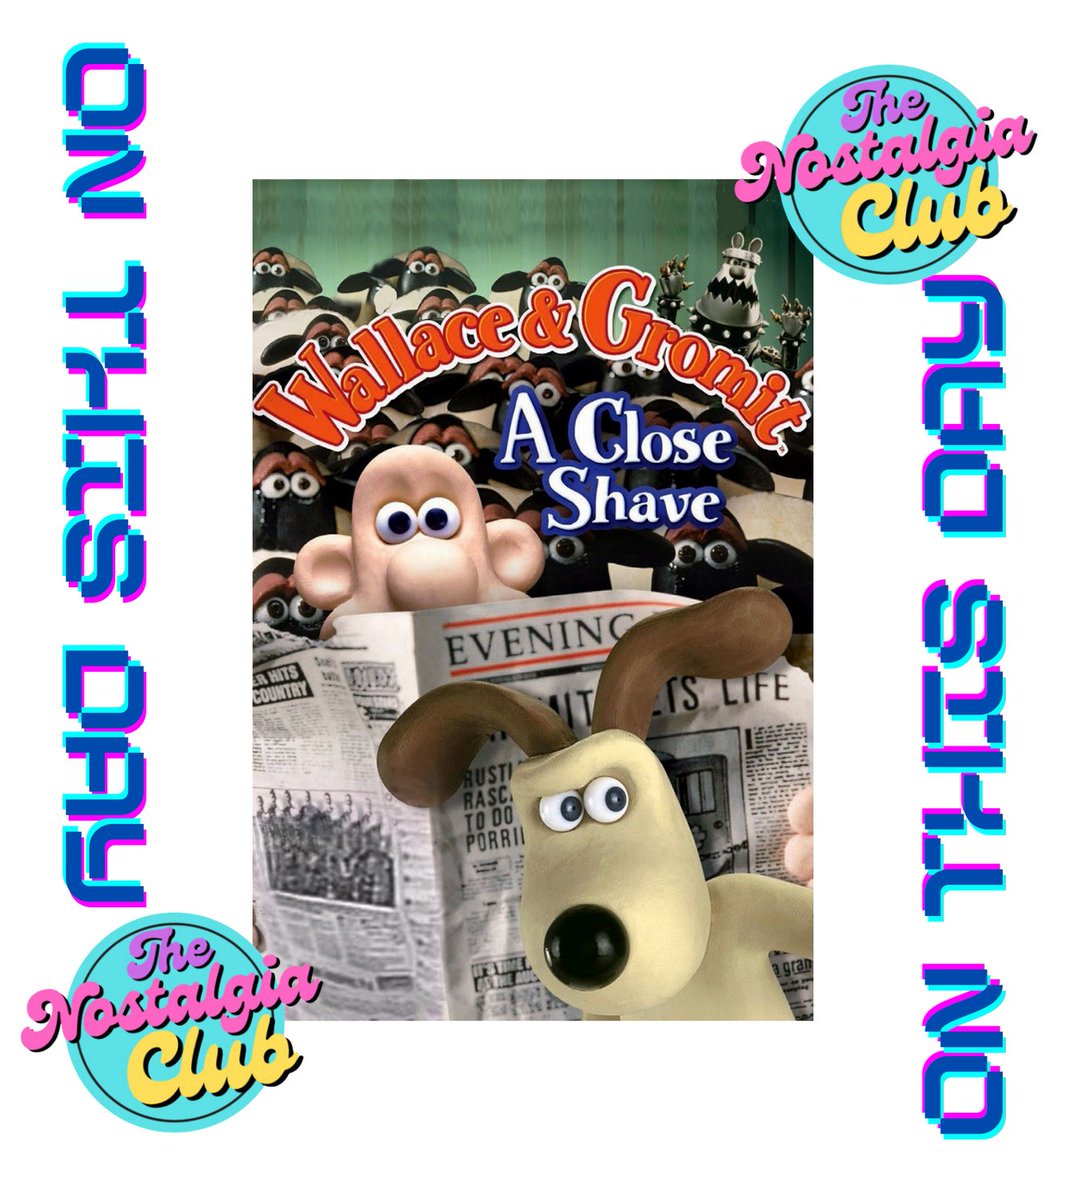 Wallace & Gromit: A Close Shave was released on this day in 1995.

🎬 🍿 🎬

#WallaceGromit #90s #1990s #ACloseShave #Gromit #Wallace #Aardman #Nostalgia